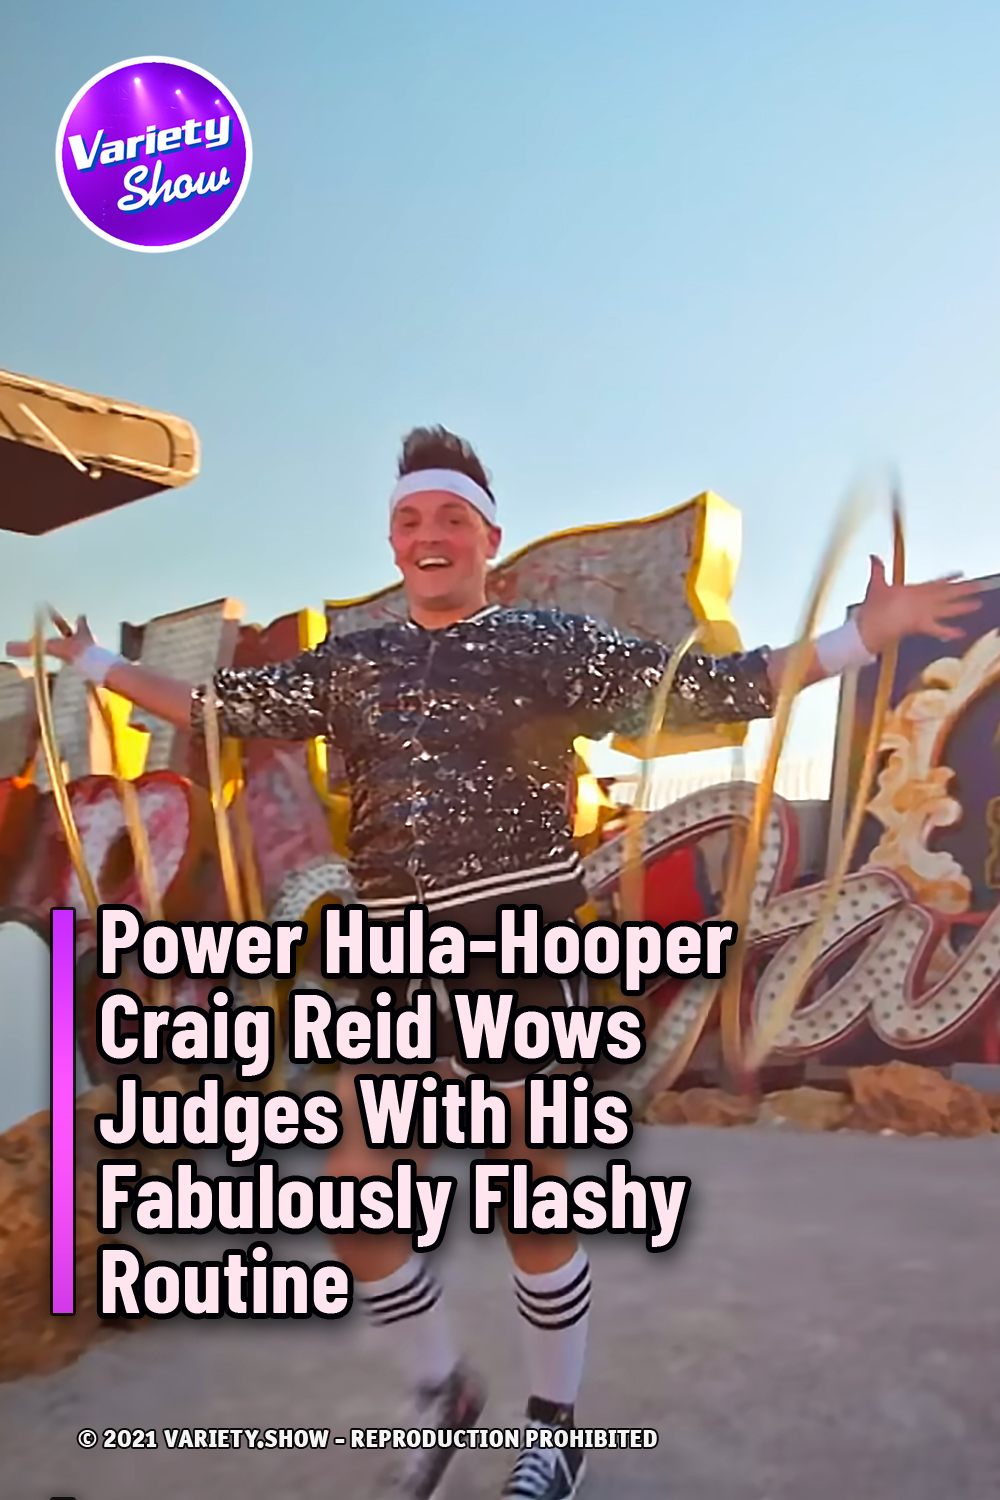 Power Hula-Hooper Craig Reid Wows Judges With His Fabulously Flashy Routine